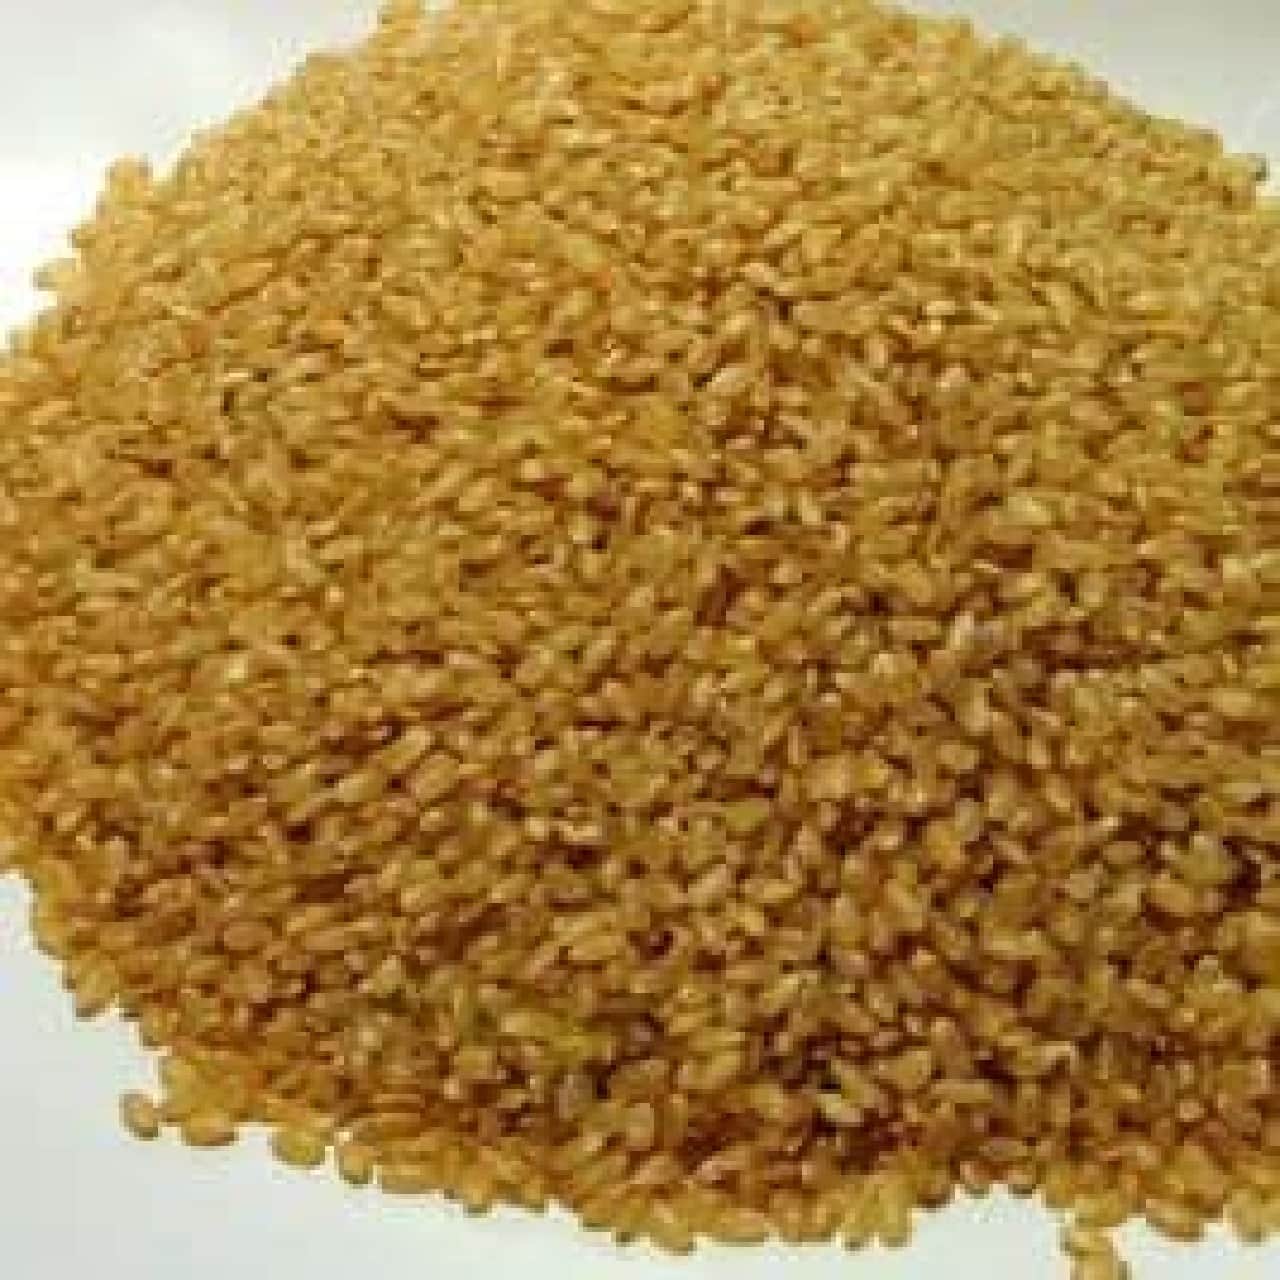 "Brown rice" containing a lot of dietary fiber